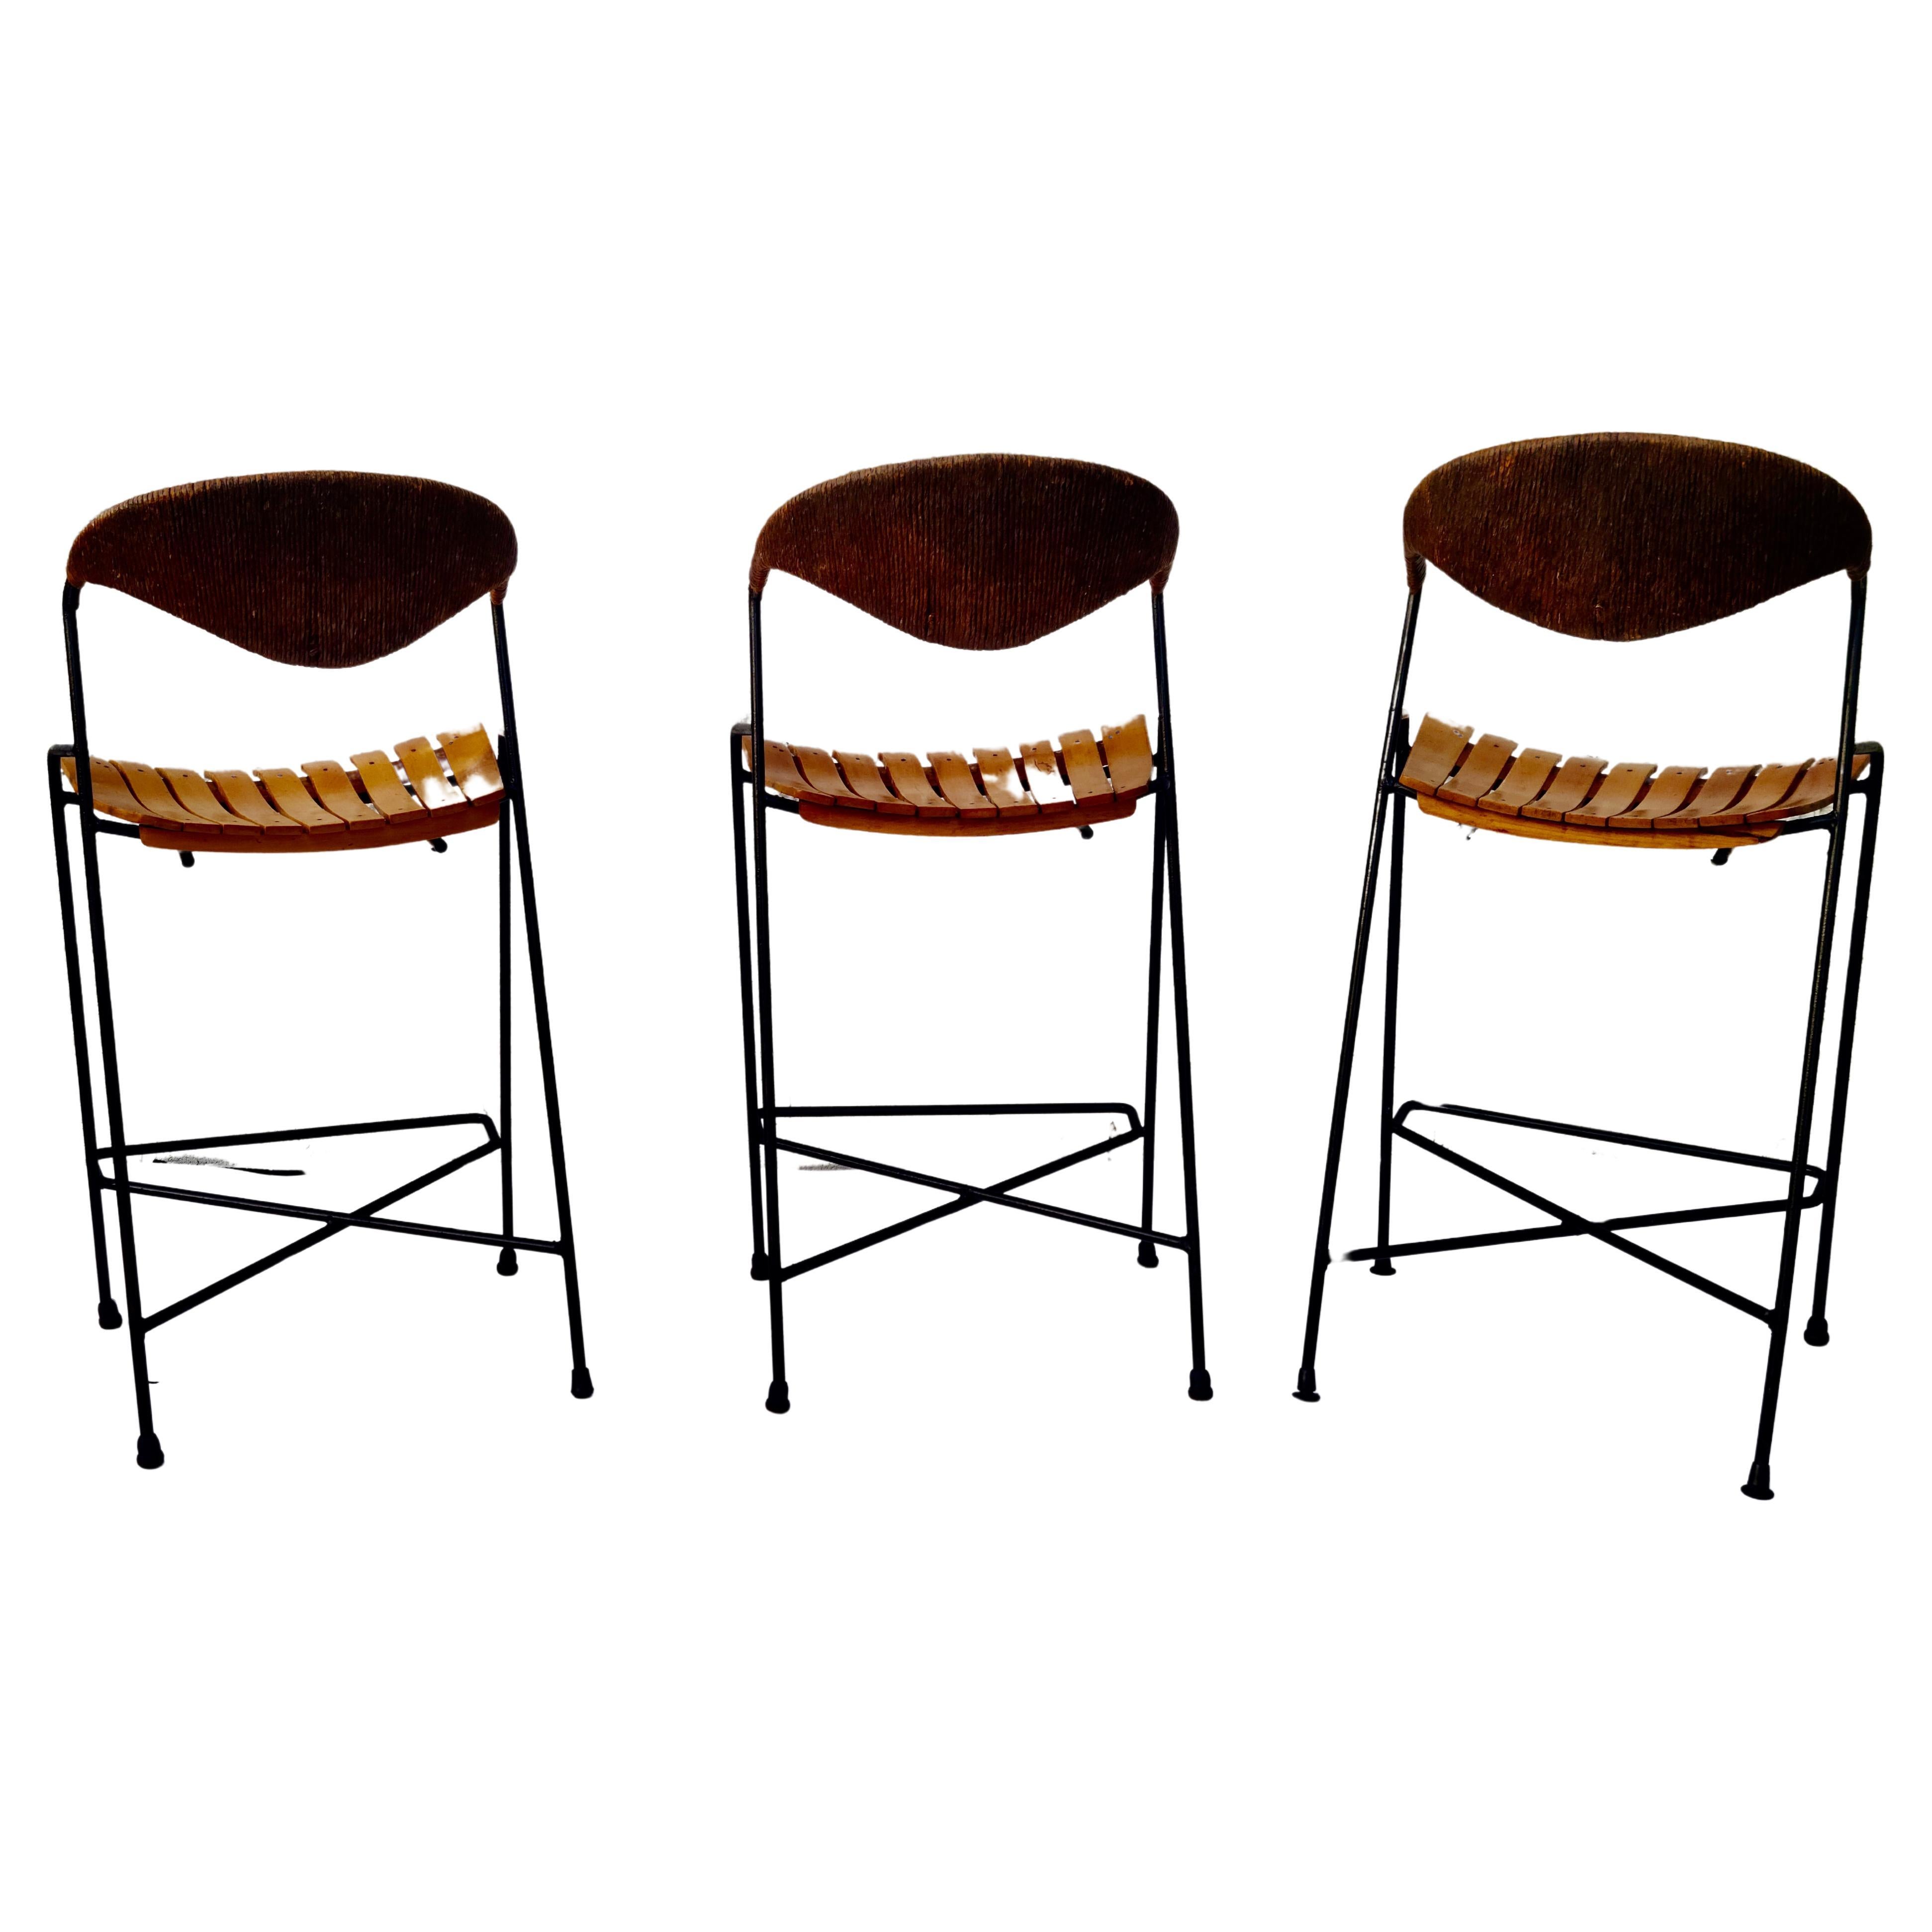 Set of 3 Barstools by Arthur Umanoff for Raymor For Sale 6